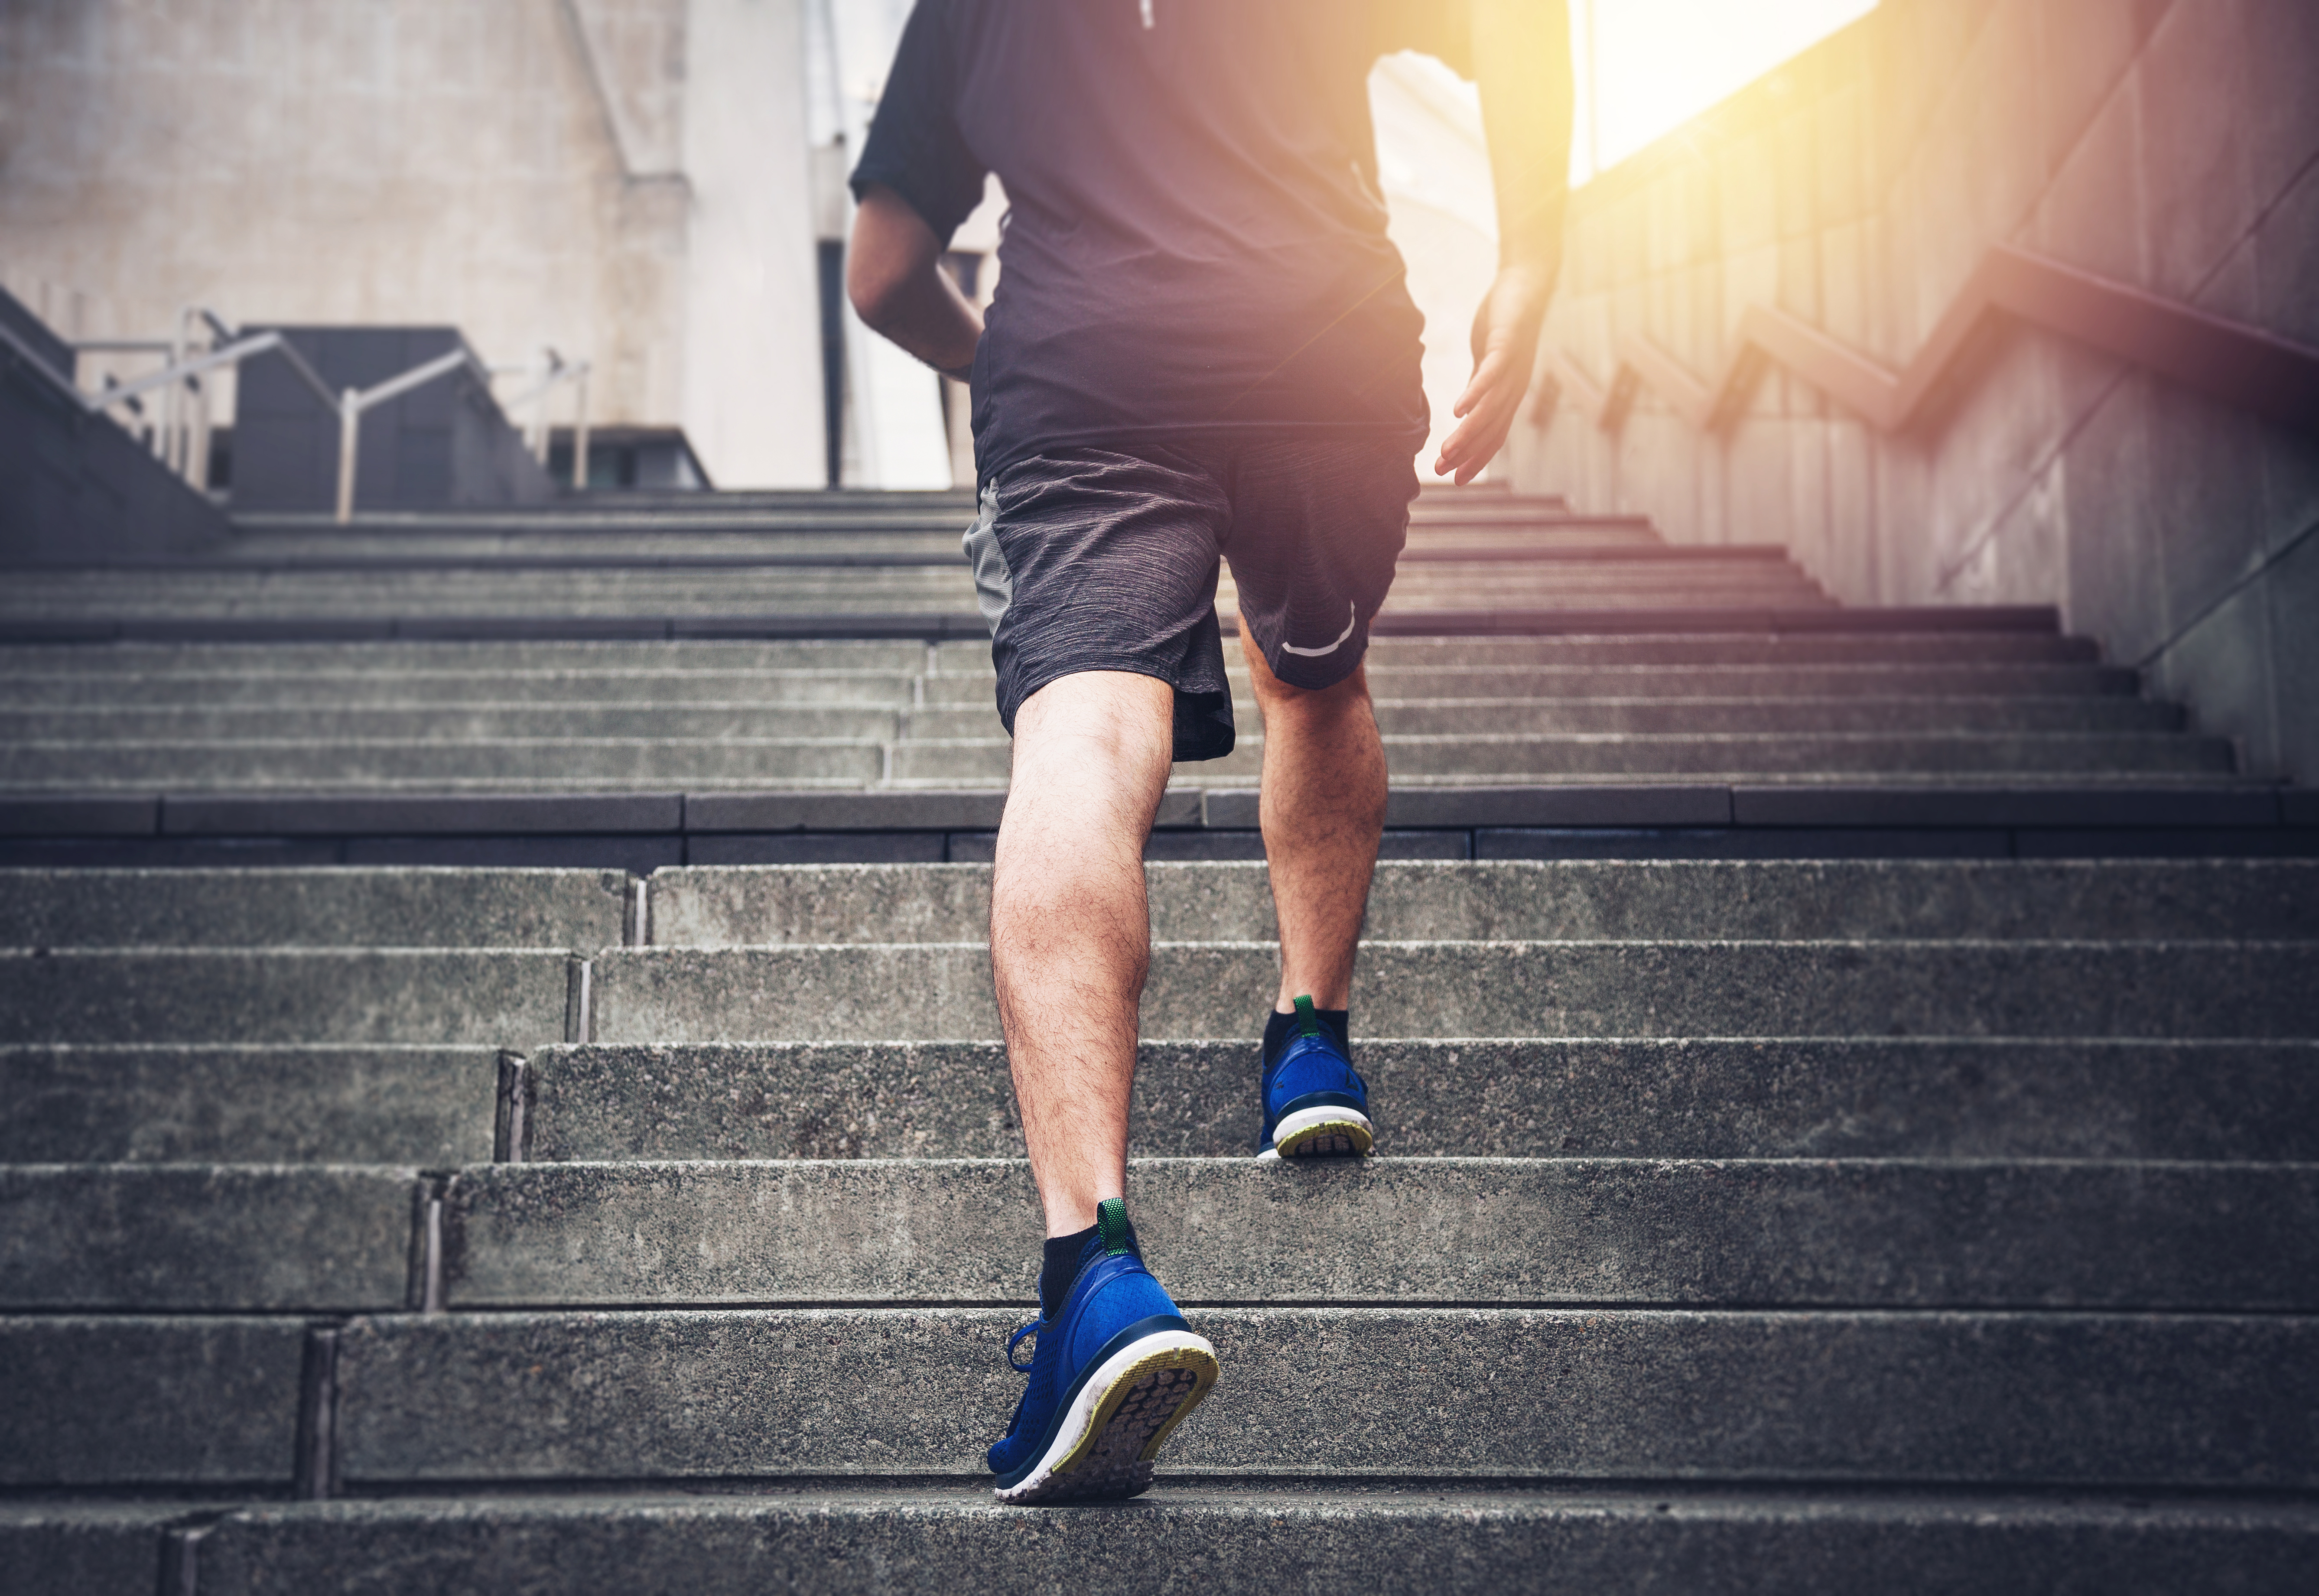 Step up your strength and balance with this stair workout